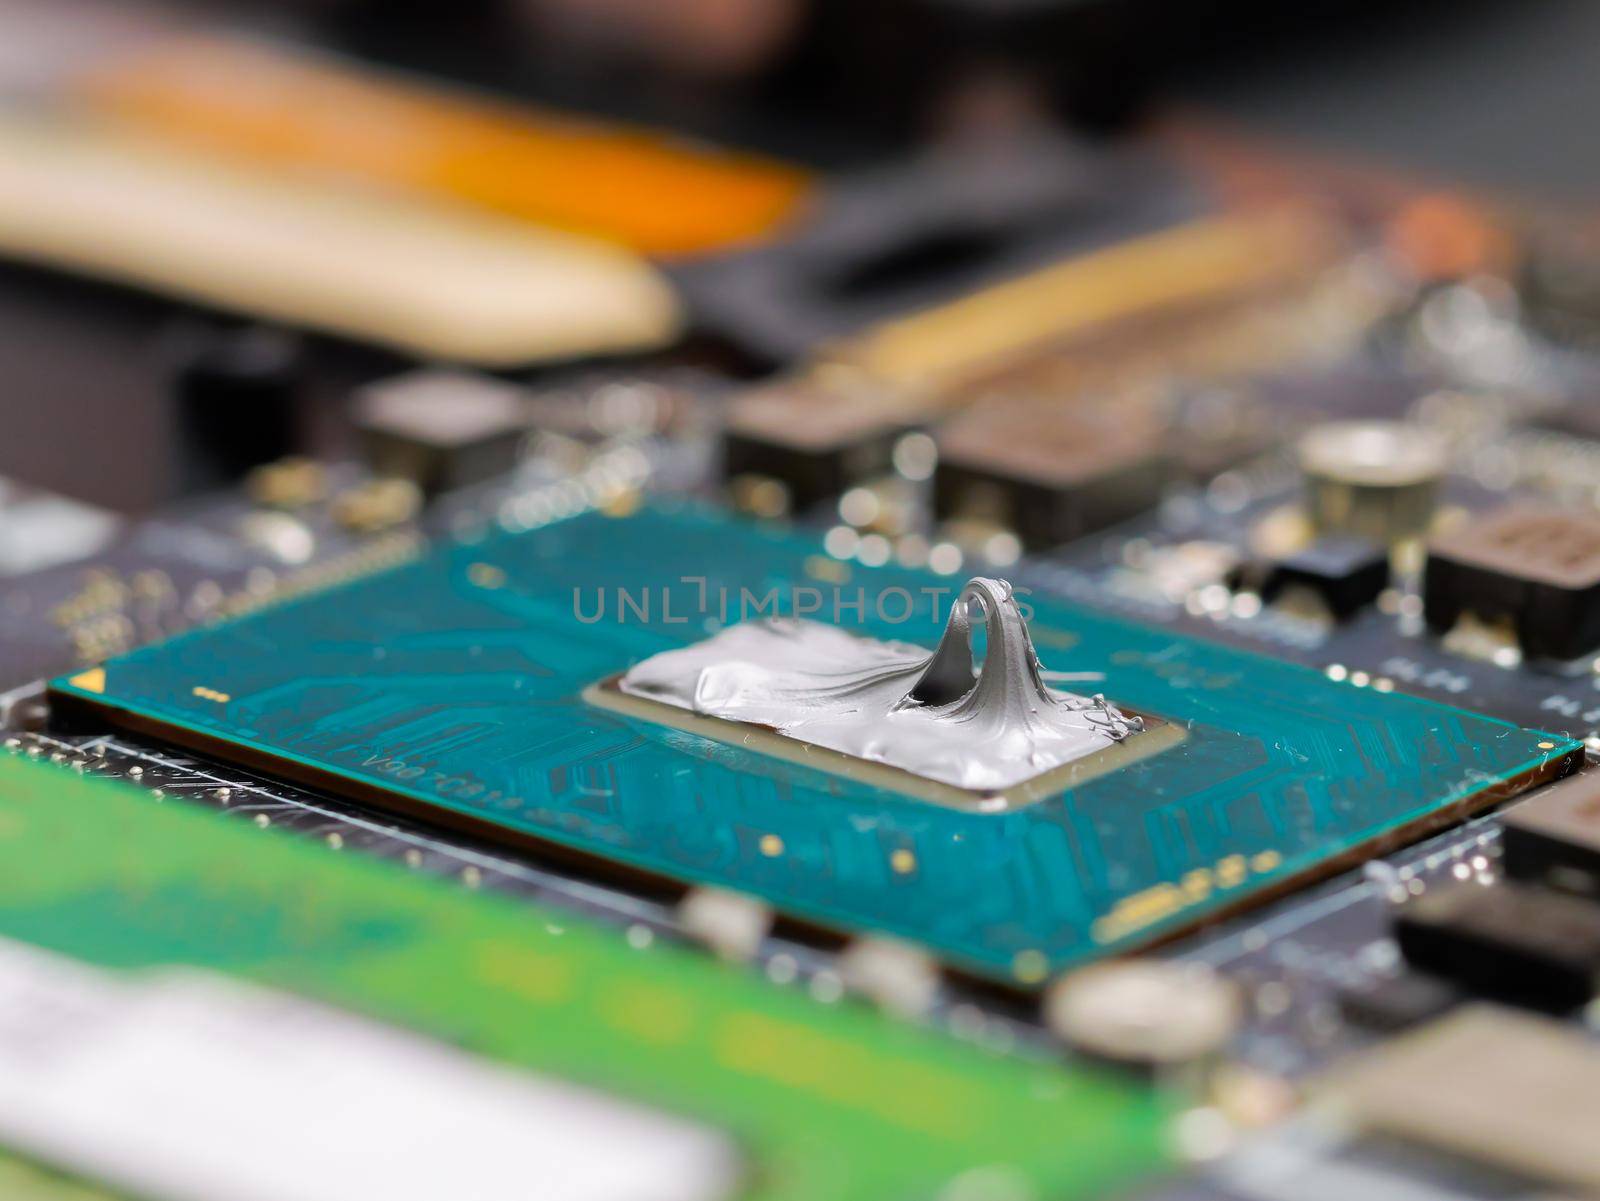 Thermal paste on the processor. The concept of laptop CPU hardware, repairing, upgrade and technology.